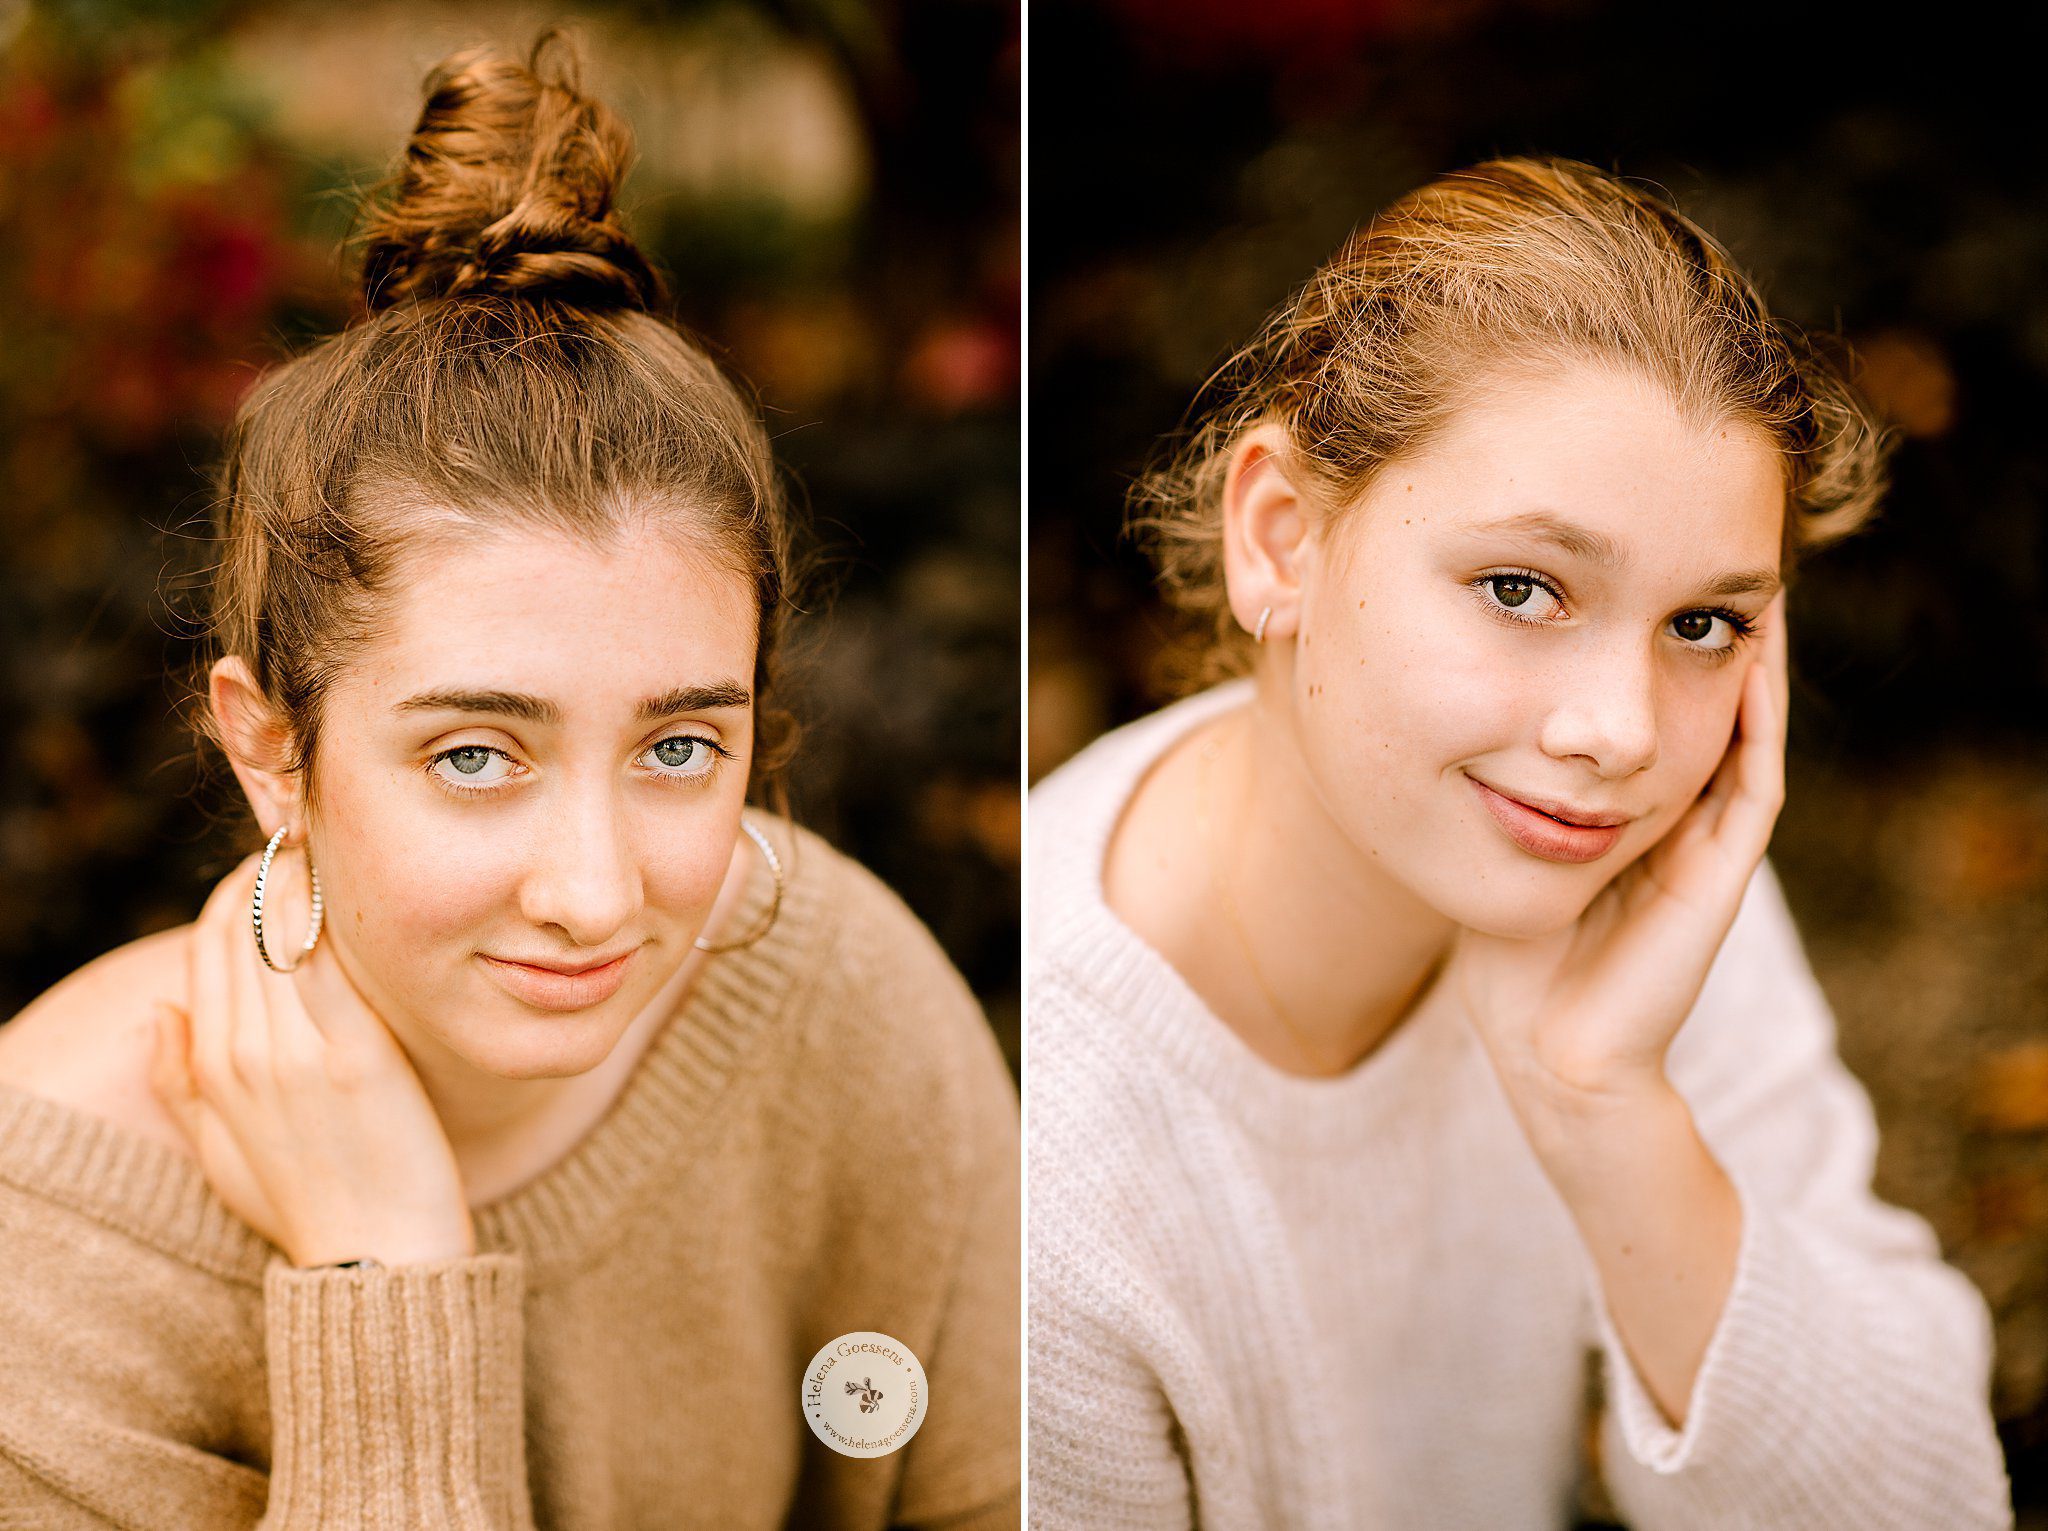 Helena Goessens Photography photographs young girls in Canton MA